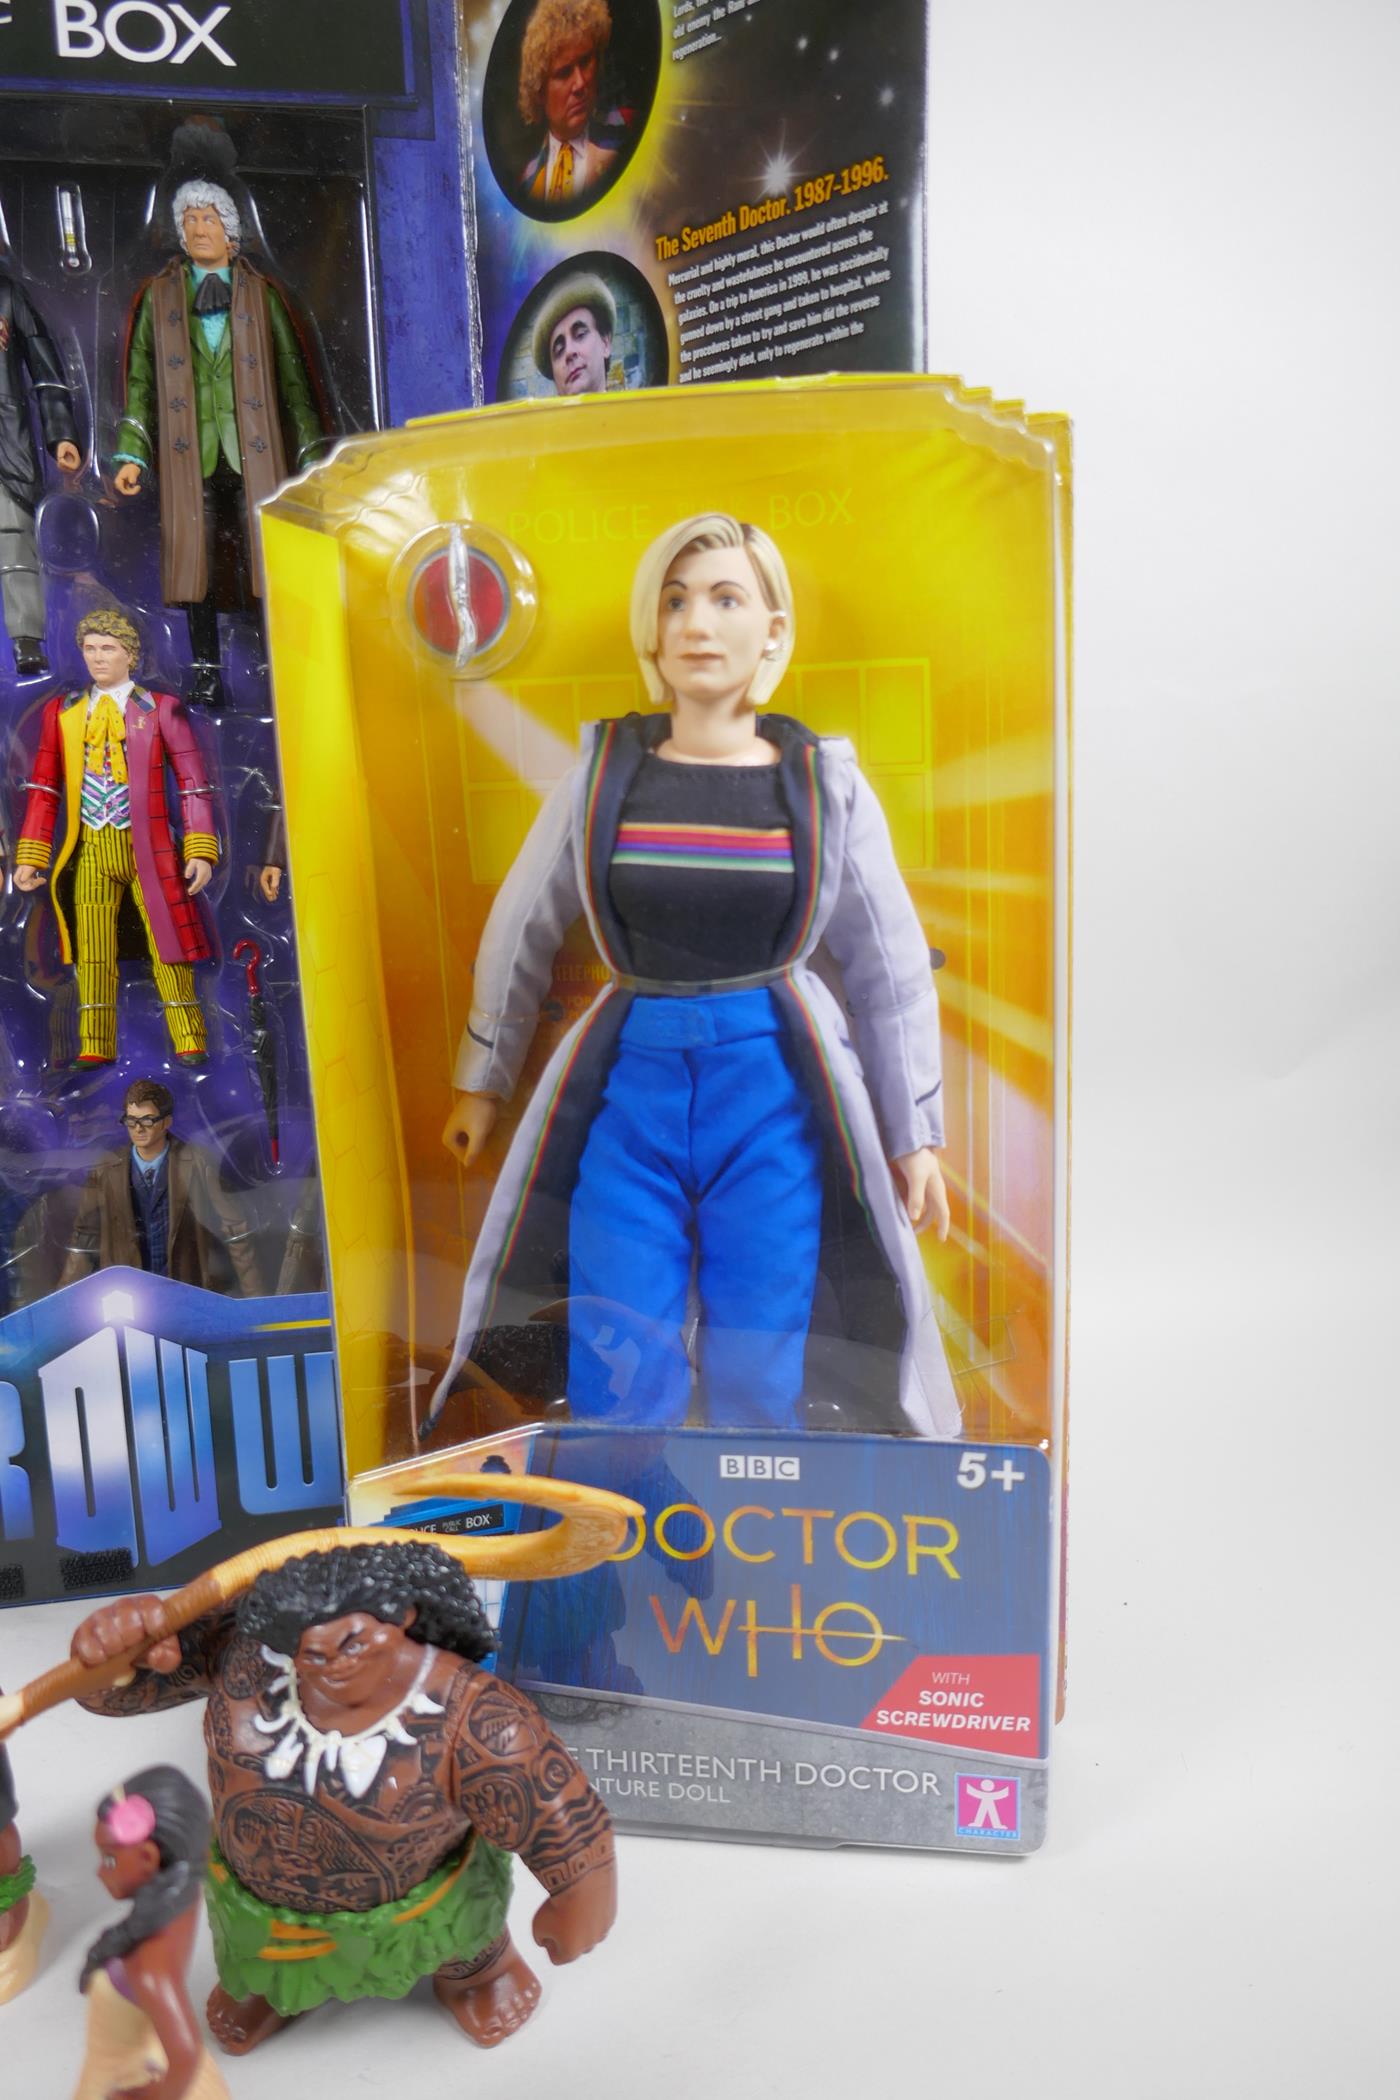 Dr Who Eleven Doctors figure set, Who-ology book, 13th Doctor adventure doll, Ben 10 omni-naut- - Image 3 of 6